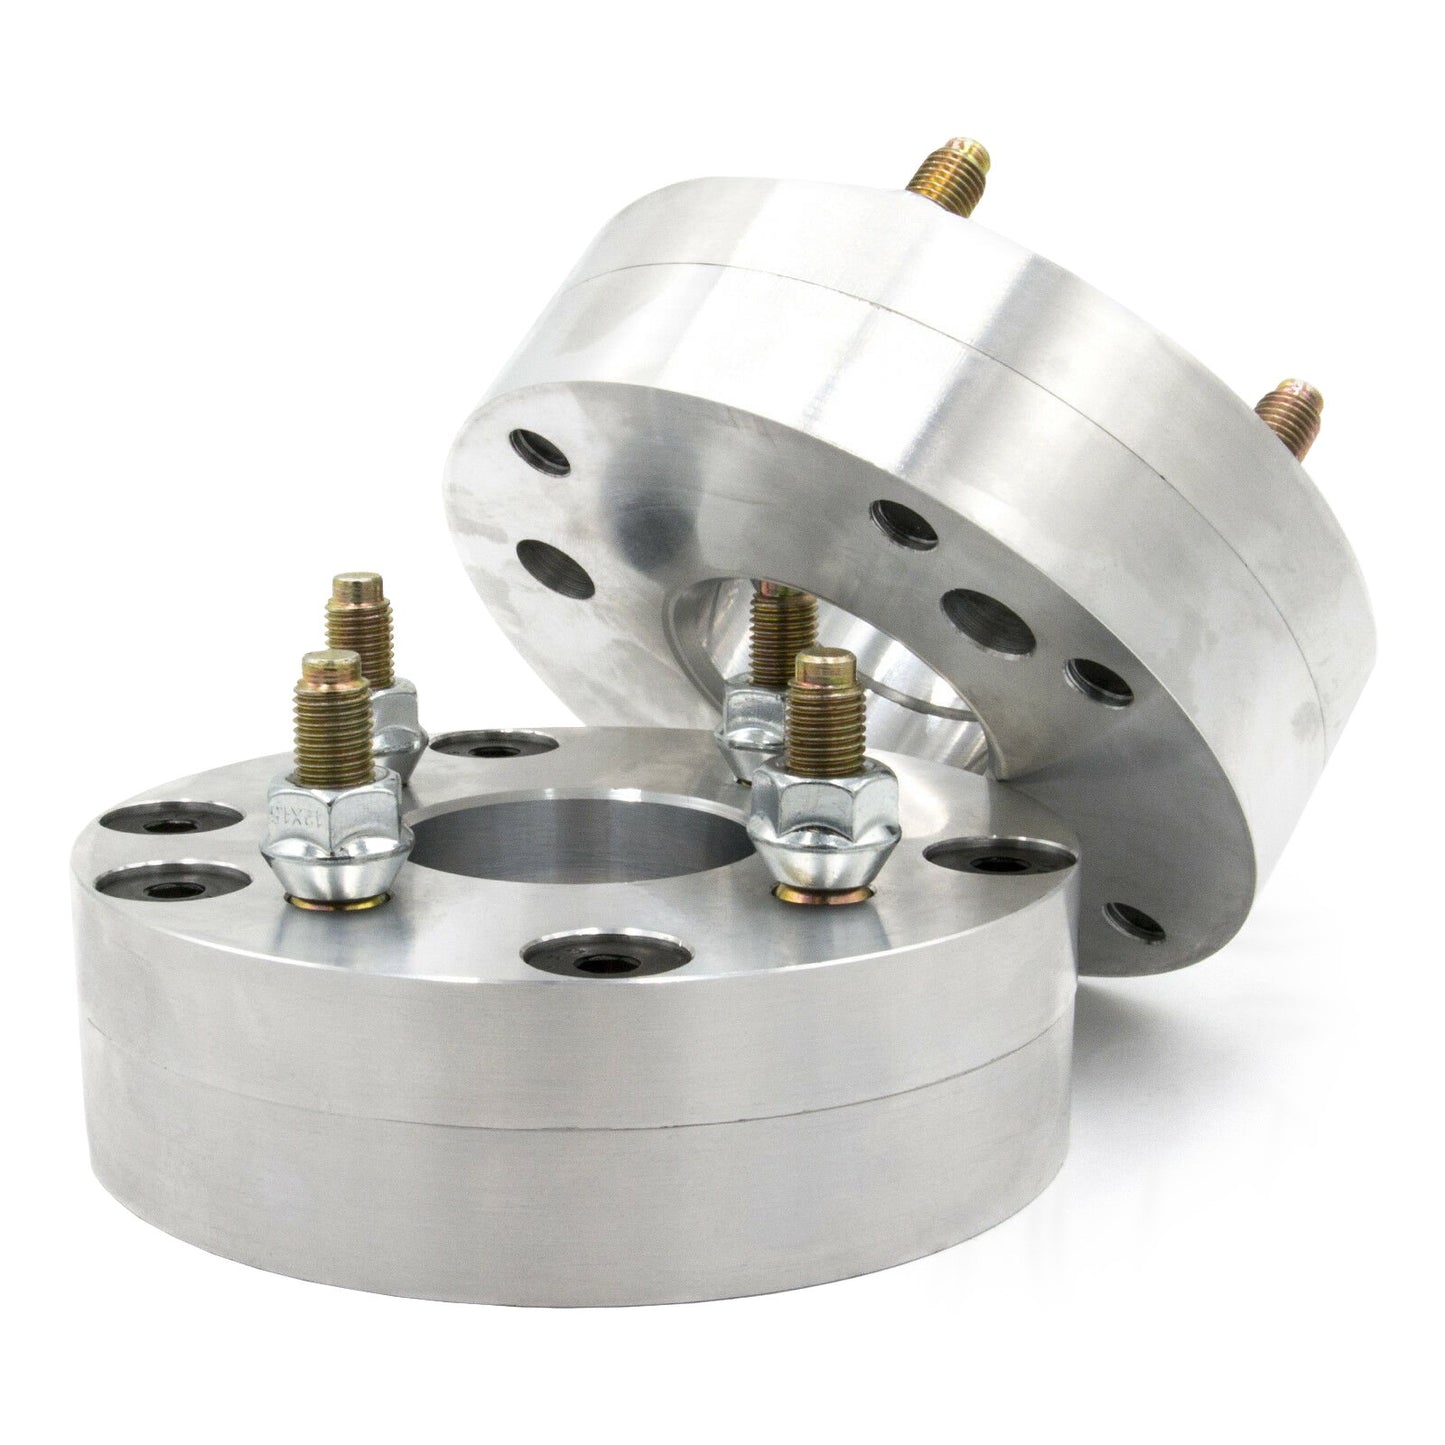 5x98 to 4x98 2 piece Wheel Adapter - Thickness: 1.5" - 3"